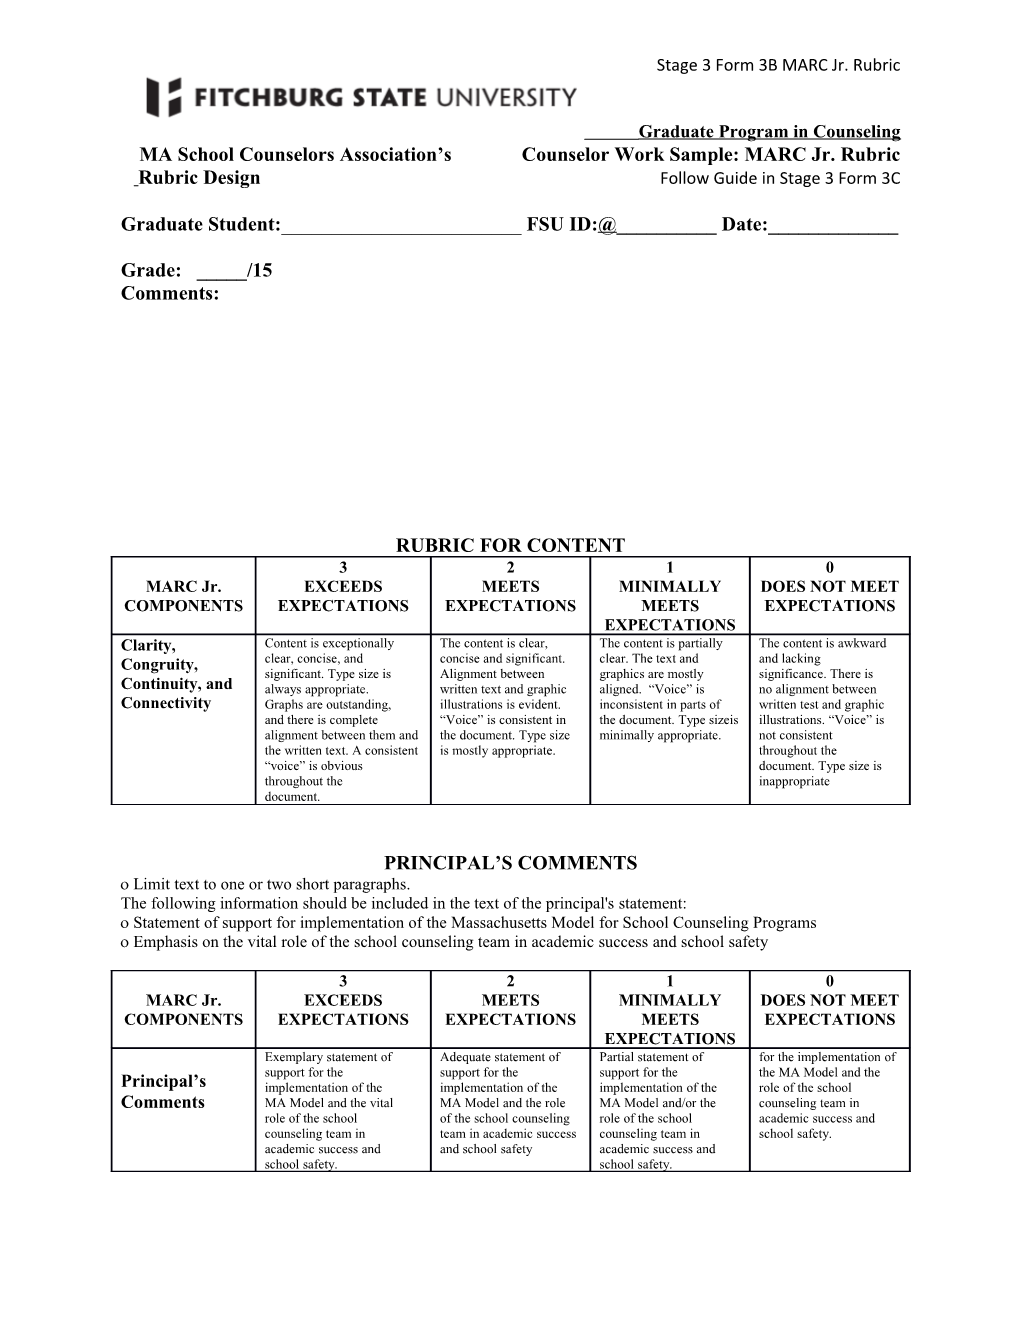 Rubric Design Follow Guide in Stage 3 Form 3C